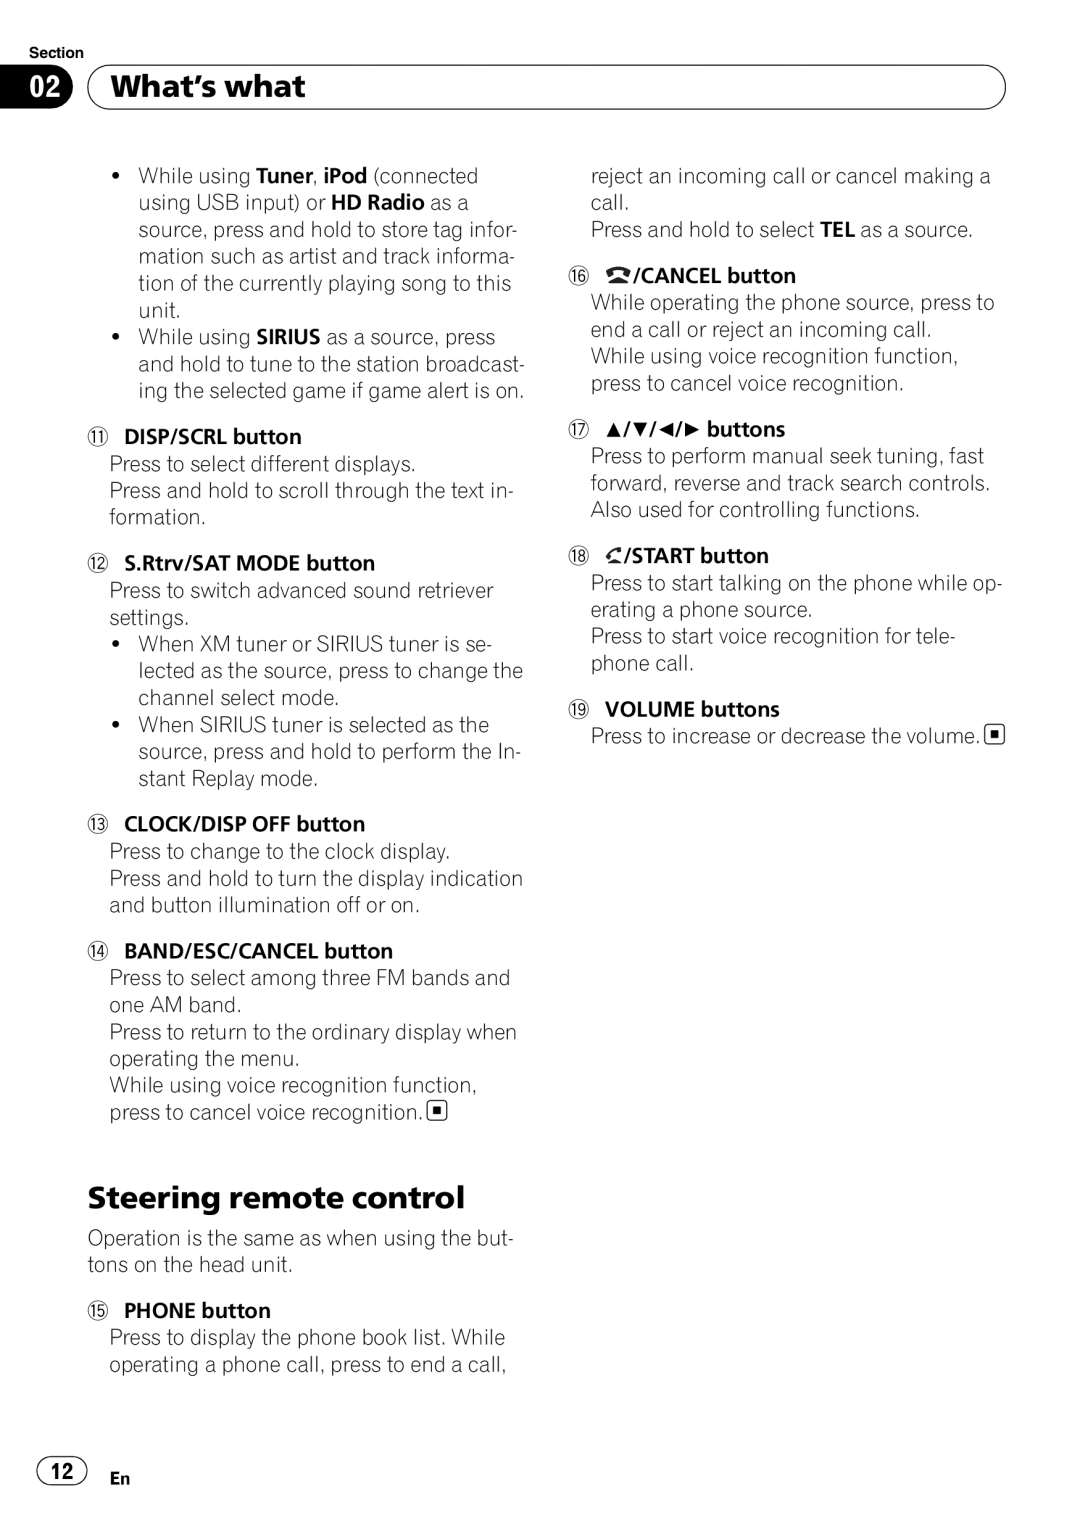 Pioneer DEH-P7100BT operation manual 02What’s what, Steering remote control 